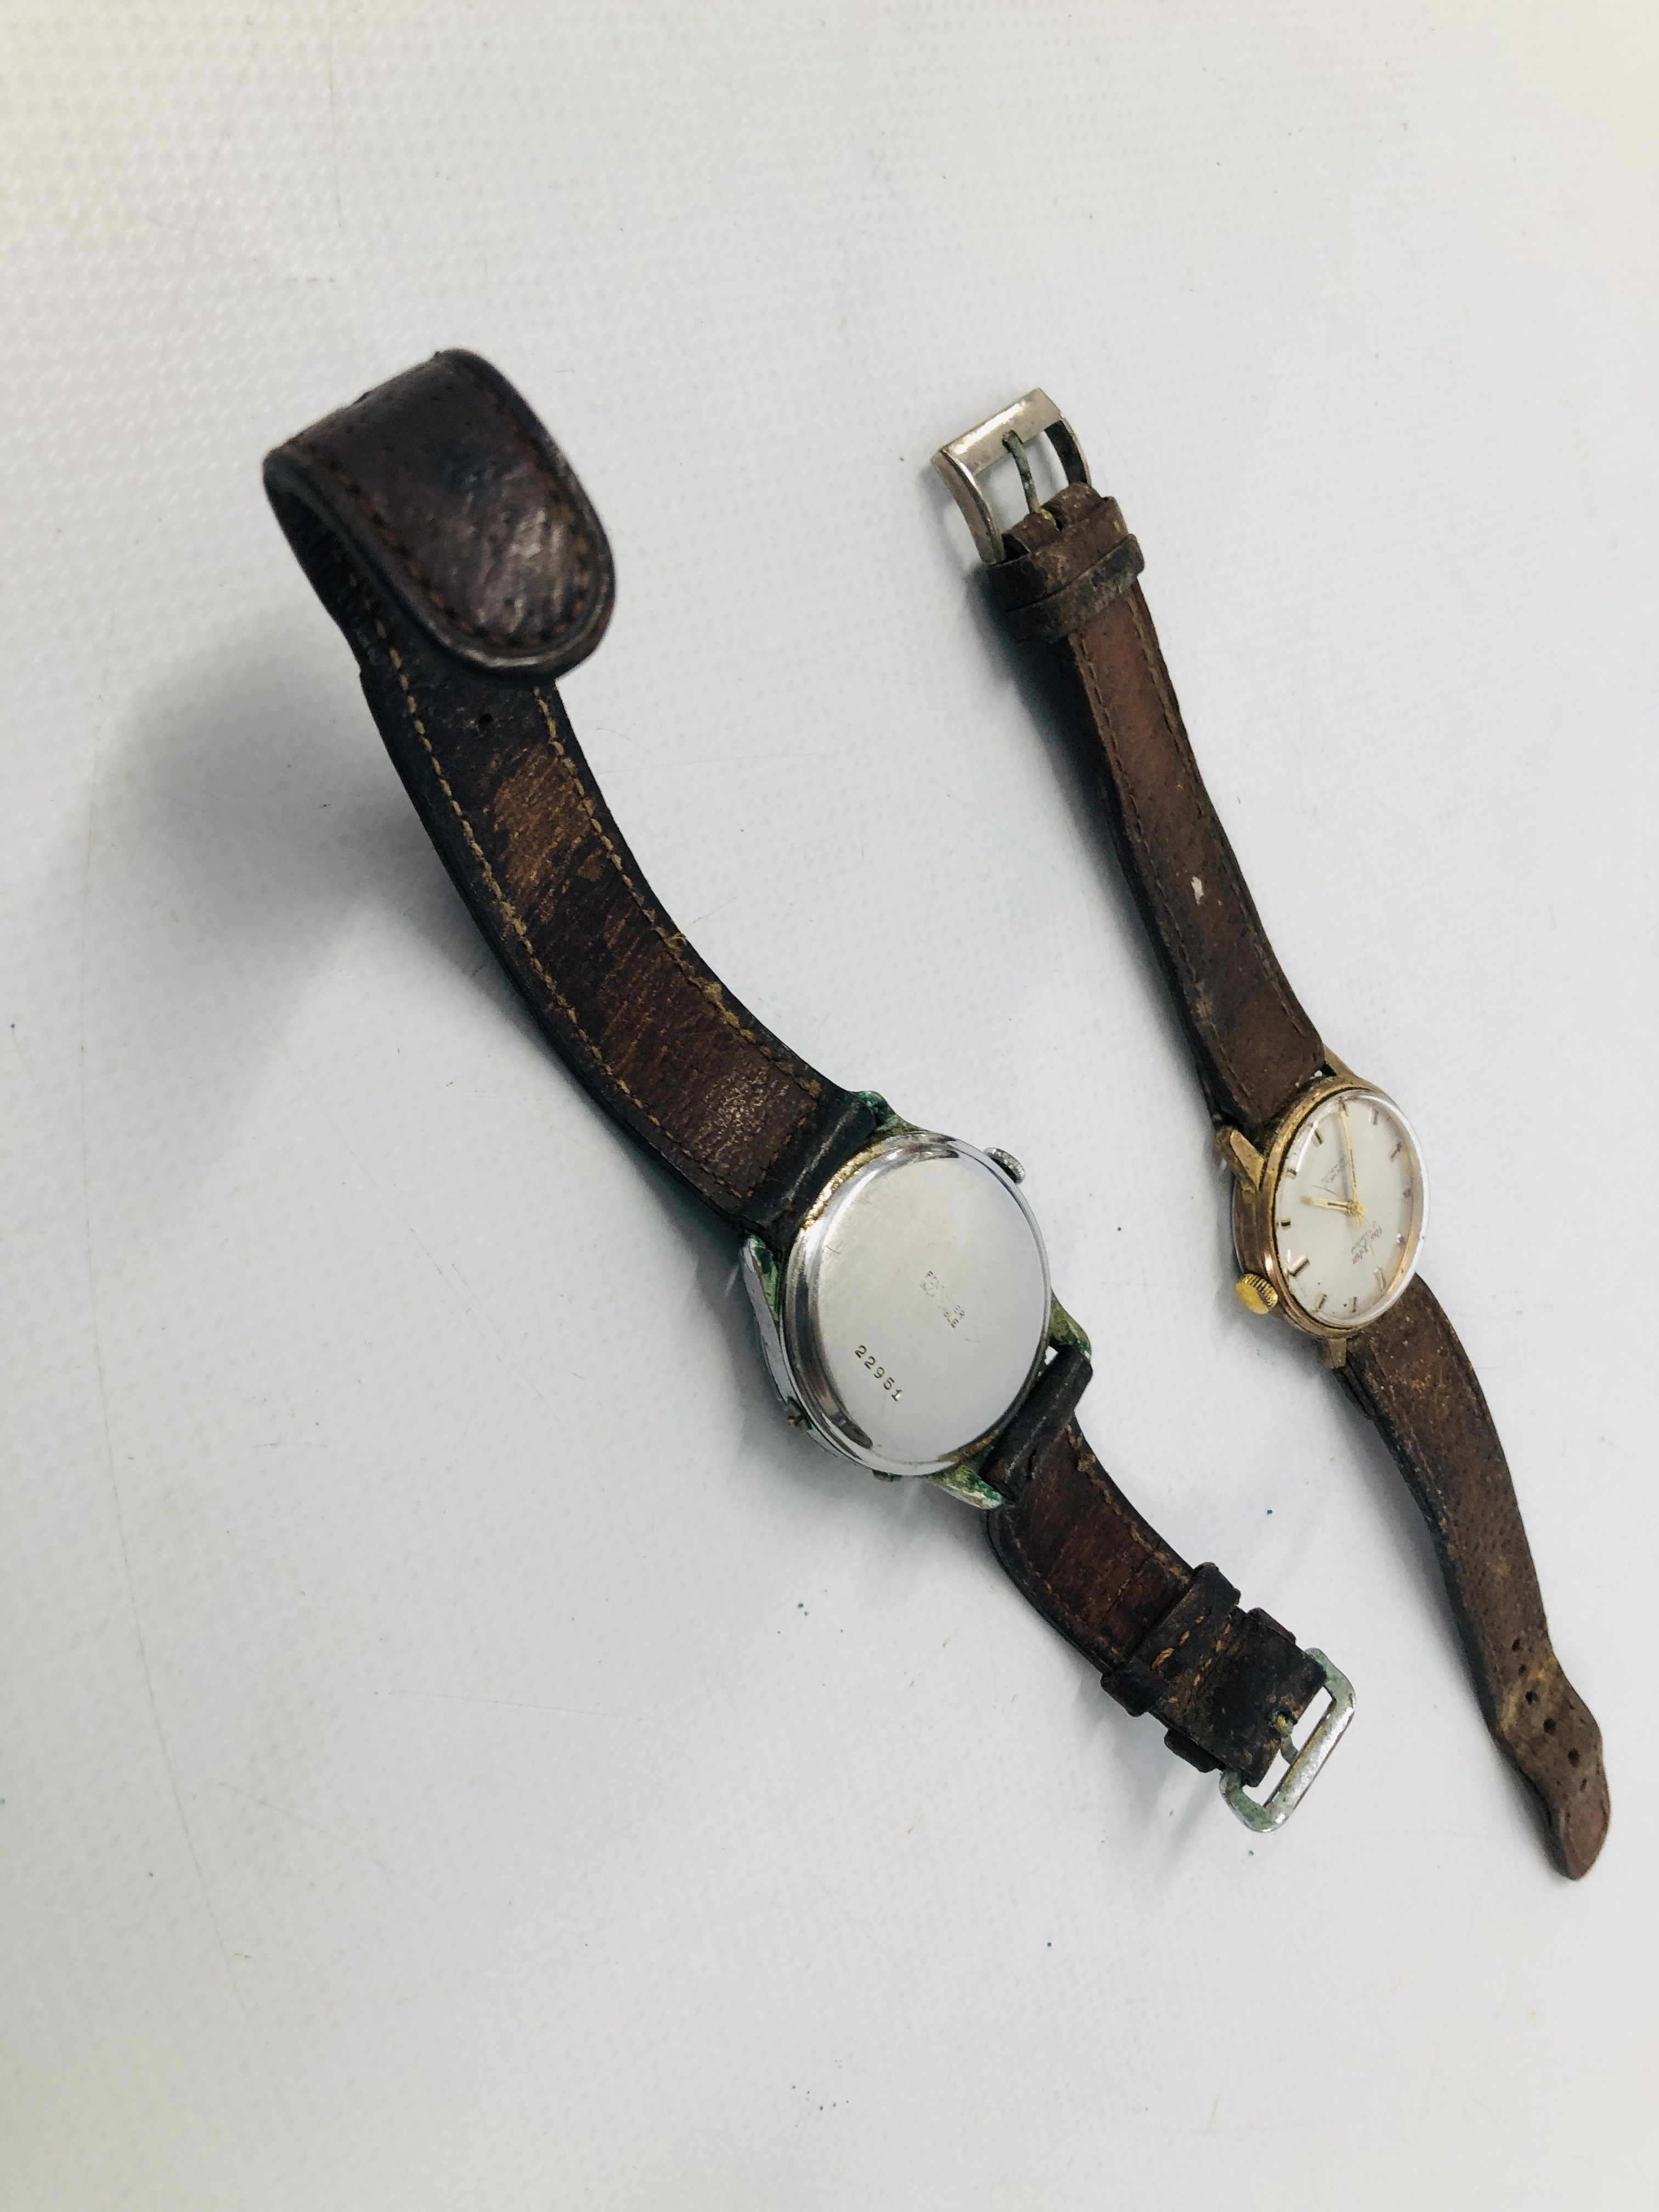 THREE VINTAGE GENT'S WRIST WATCHES TO INCLUDE NIVIA, MUDU ETC. - Image 7 of 11